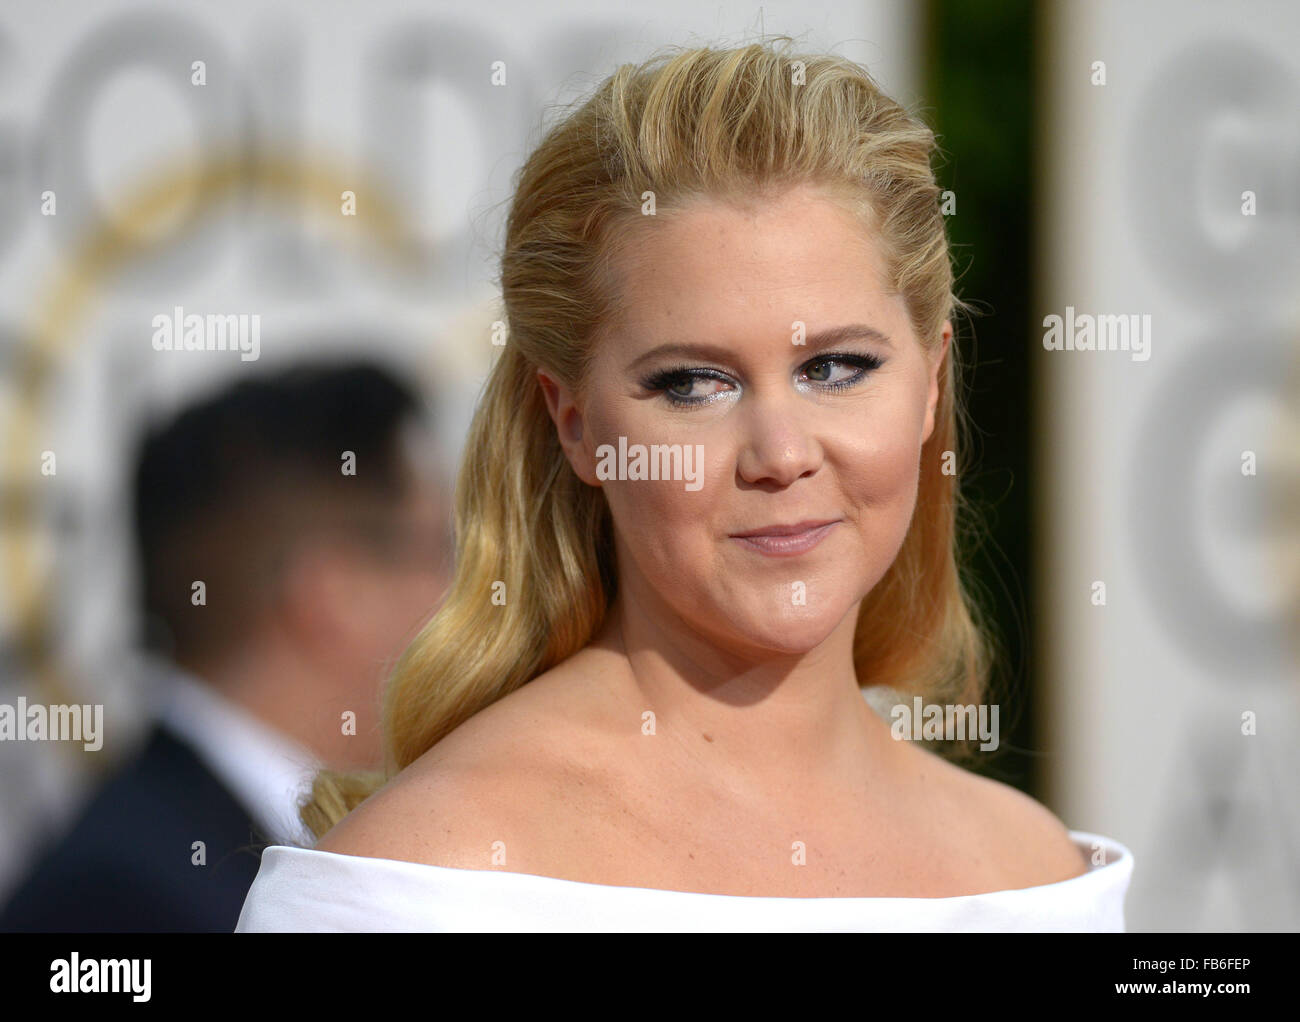 Los Angeles, California, USA. 10th January, 2016. Amy Schumer arrives at the Golden Globes, Los Angeles, CA Credit:  Sydney Alford/Alamy Live News Stock Photo